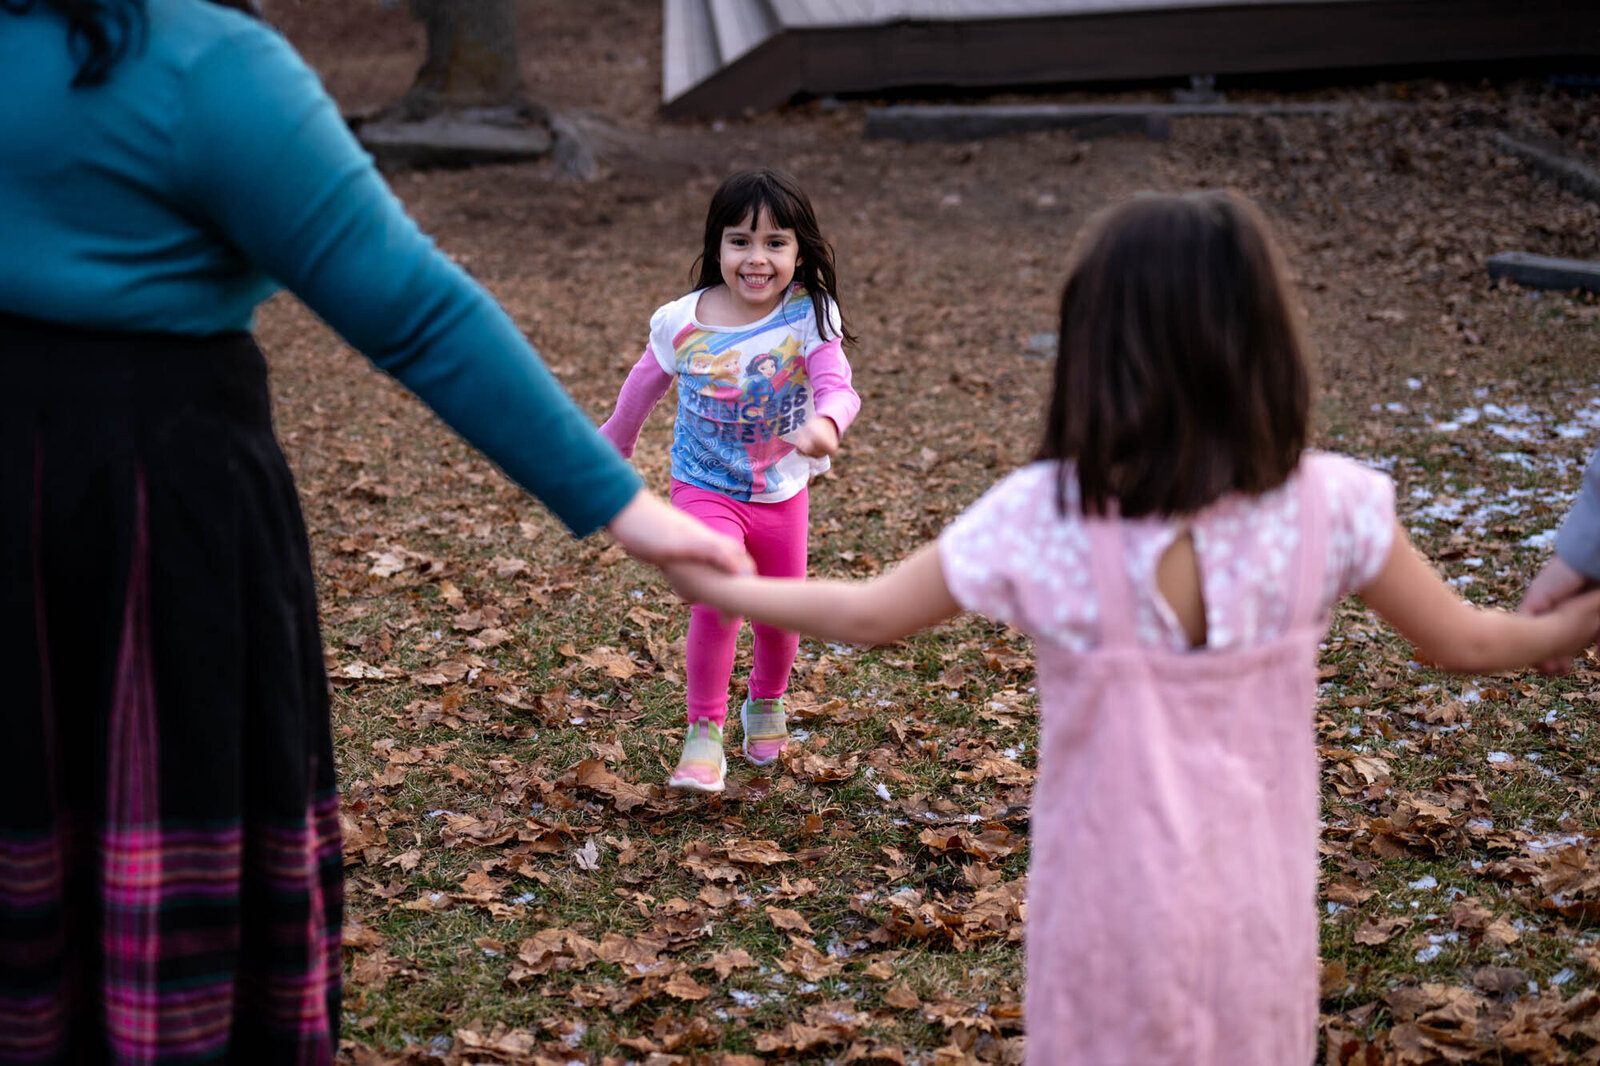 Youngest daughter laughs during a game of red rover with family during photoshoot